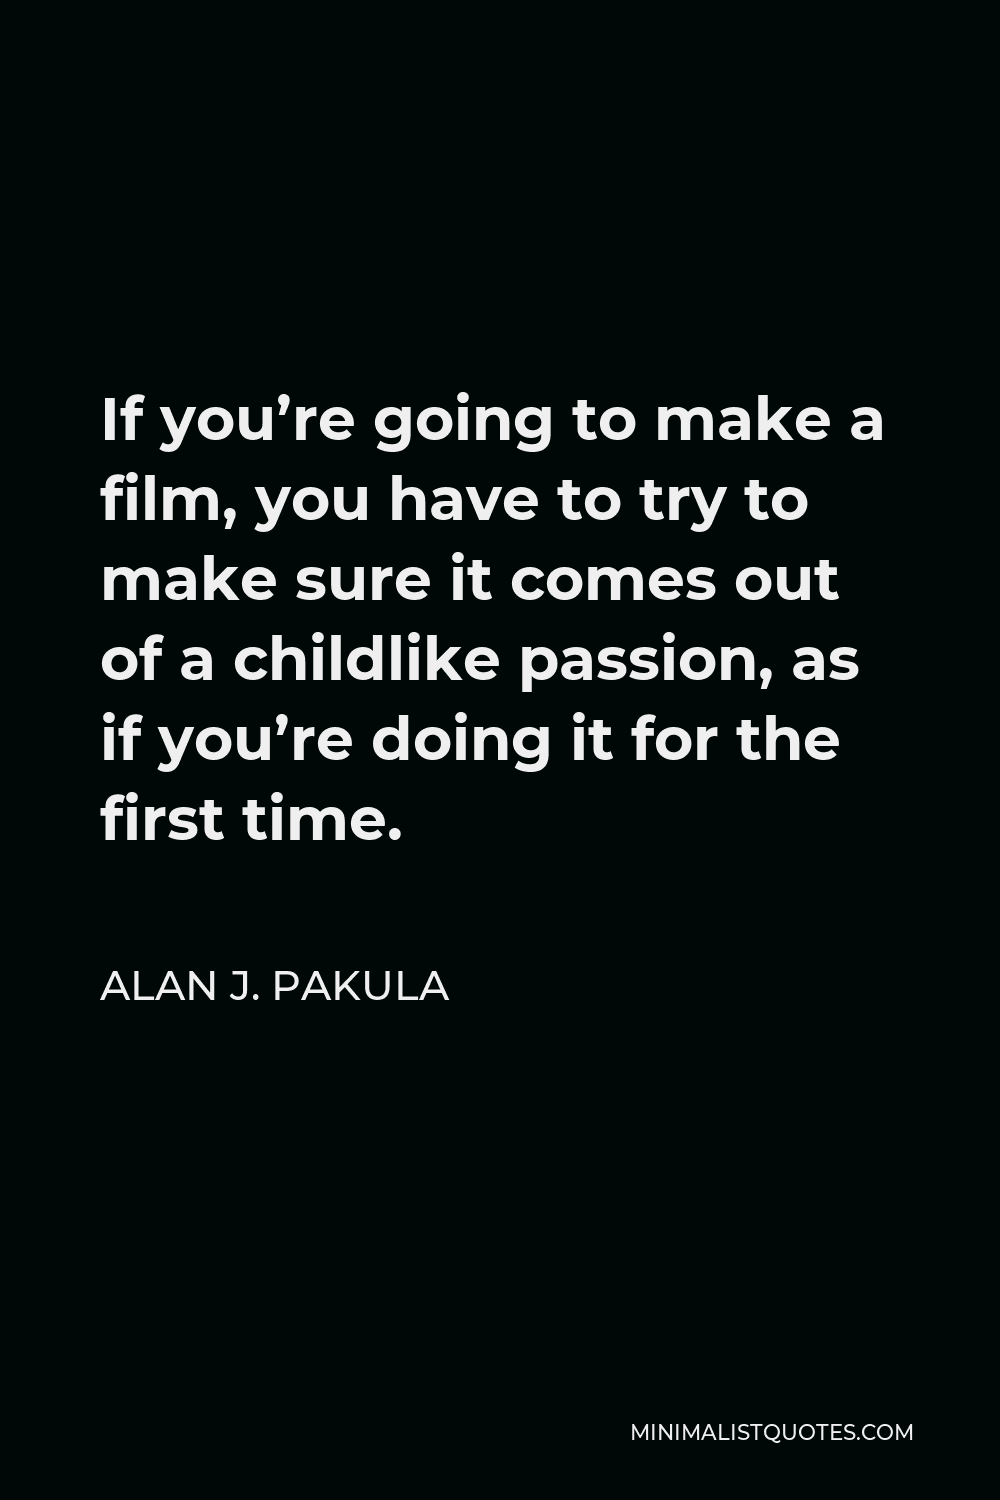 Alan J. Pakula Quote - If you’re going to make a film, you have to try to make sure it comes out of a childlike passion, as if you’re doing it for the first time.